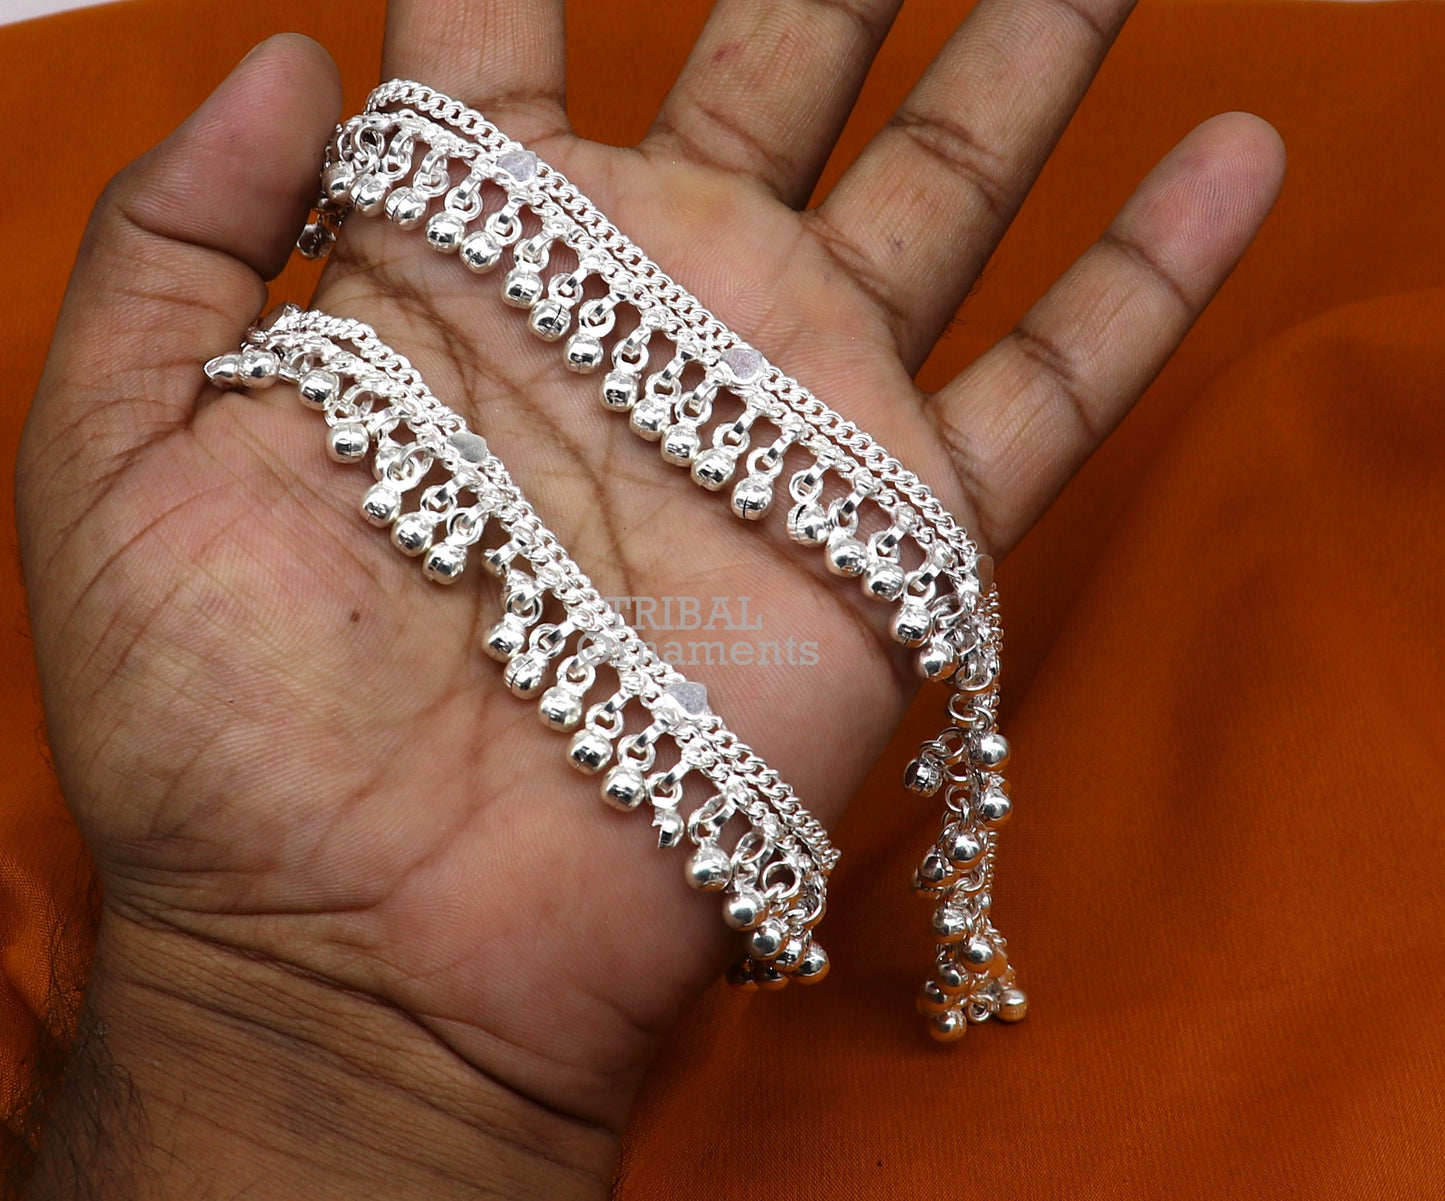 9.5" Long handmade sterling silver amazing noisy bells ankle bracelet, gorgeous charm anklets customized belly dance gifting jewelry ank468 - TRIBAL ORNAMENTS